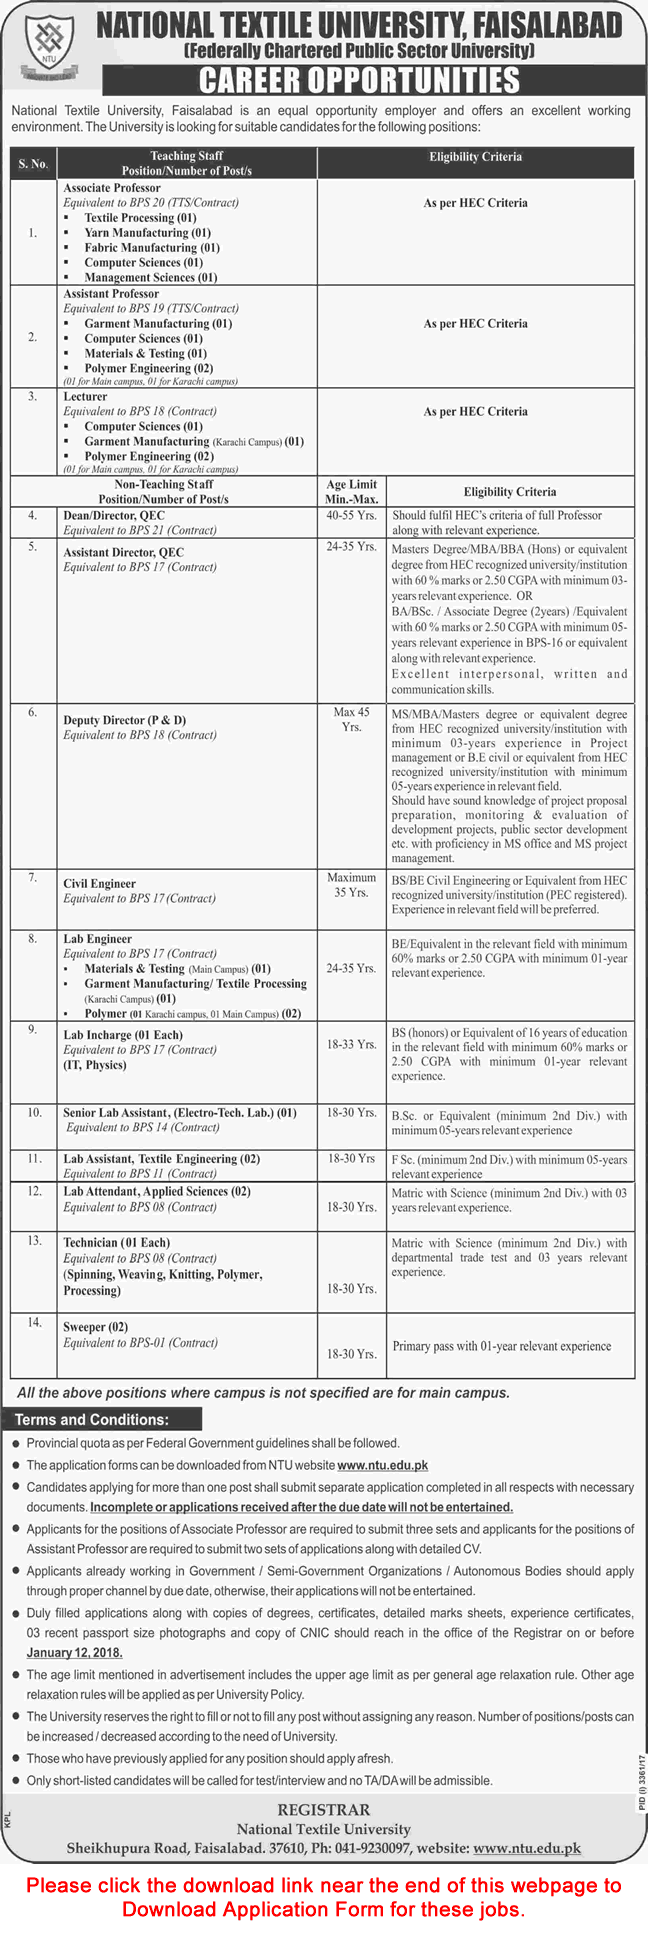 National Textile University Faisalabad Jobs December 2017 Application Form Teaching Faculty & Others Latest